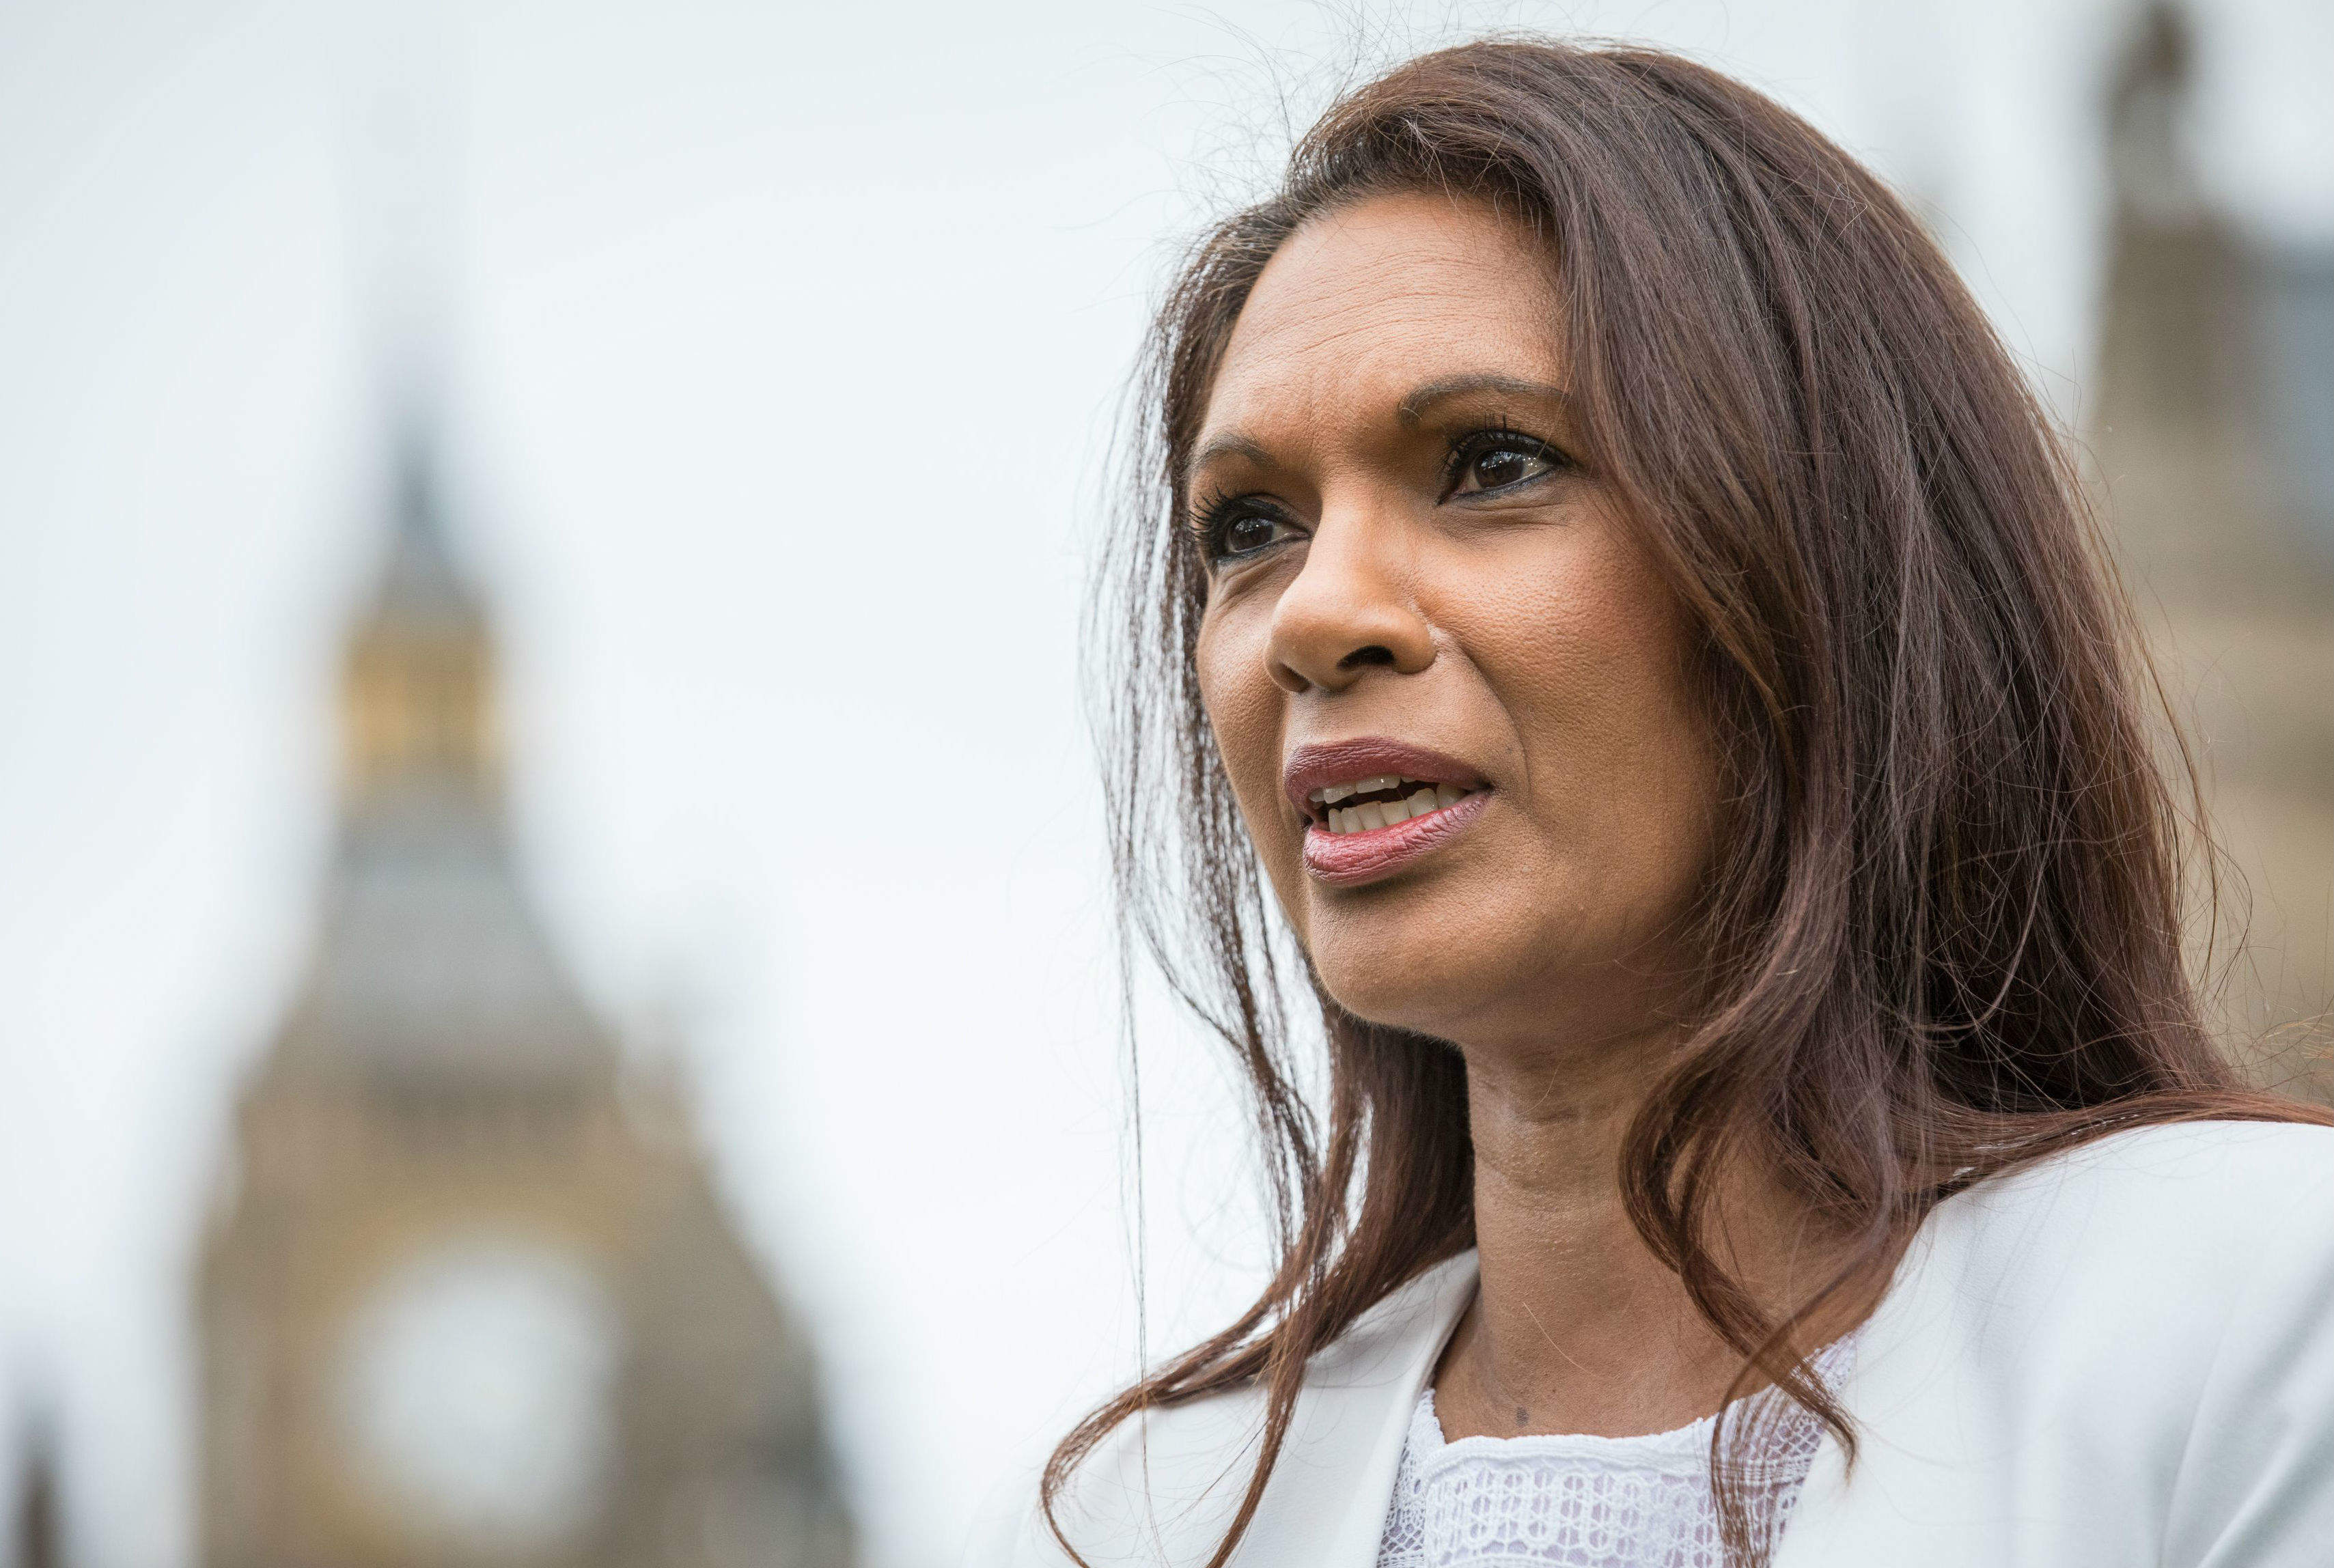 Gina Miller: Balancing Brexit battles with her own safety and that of her family